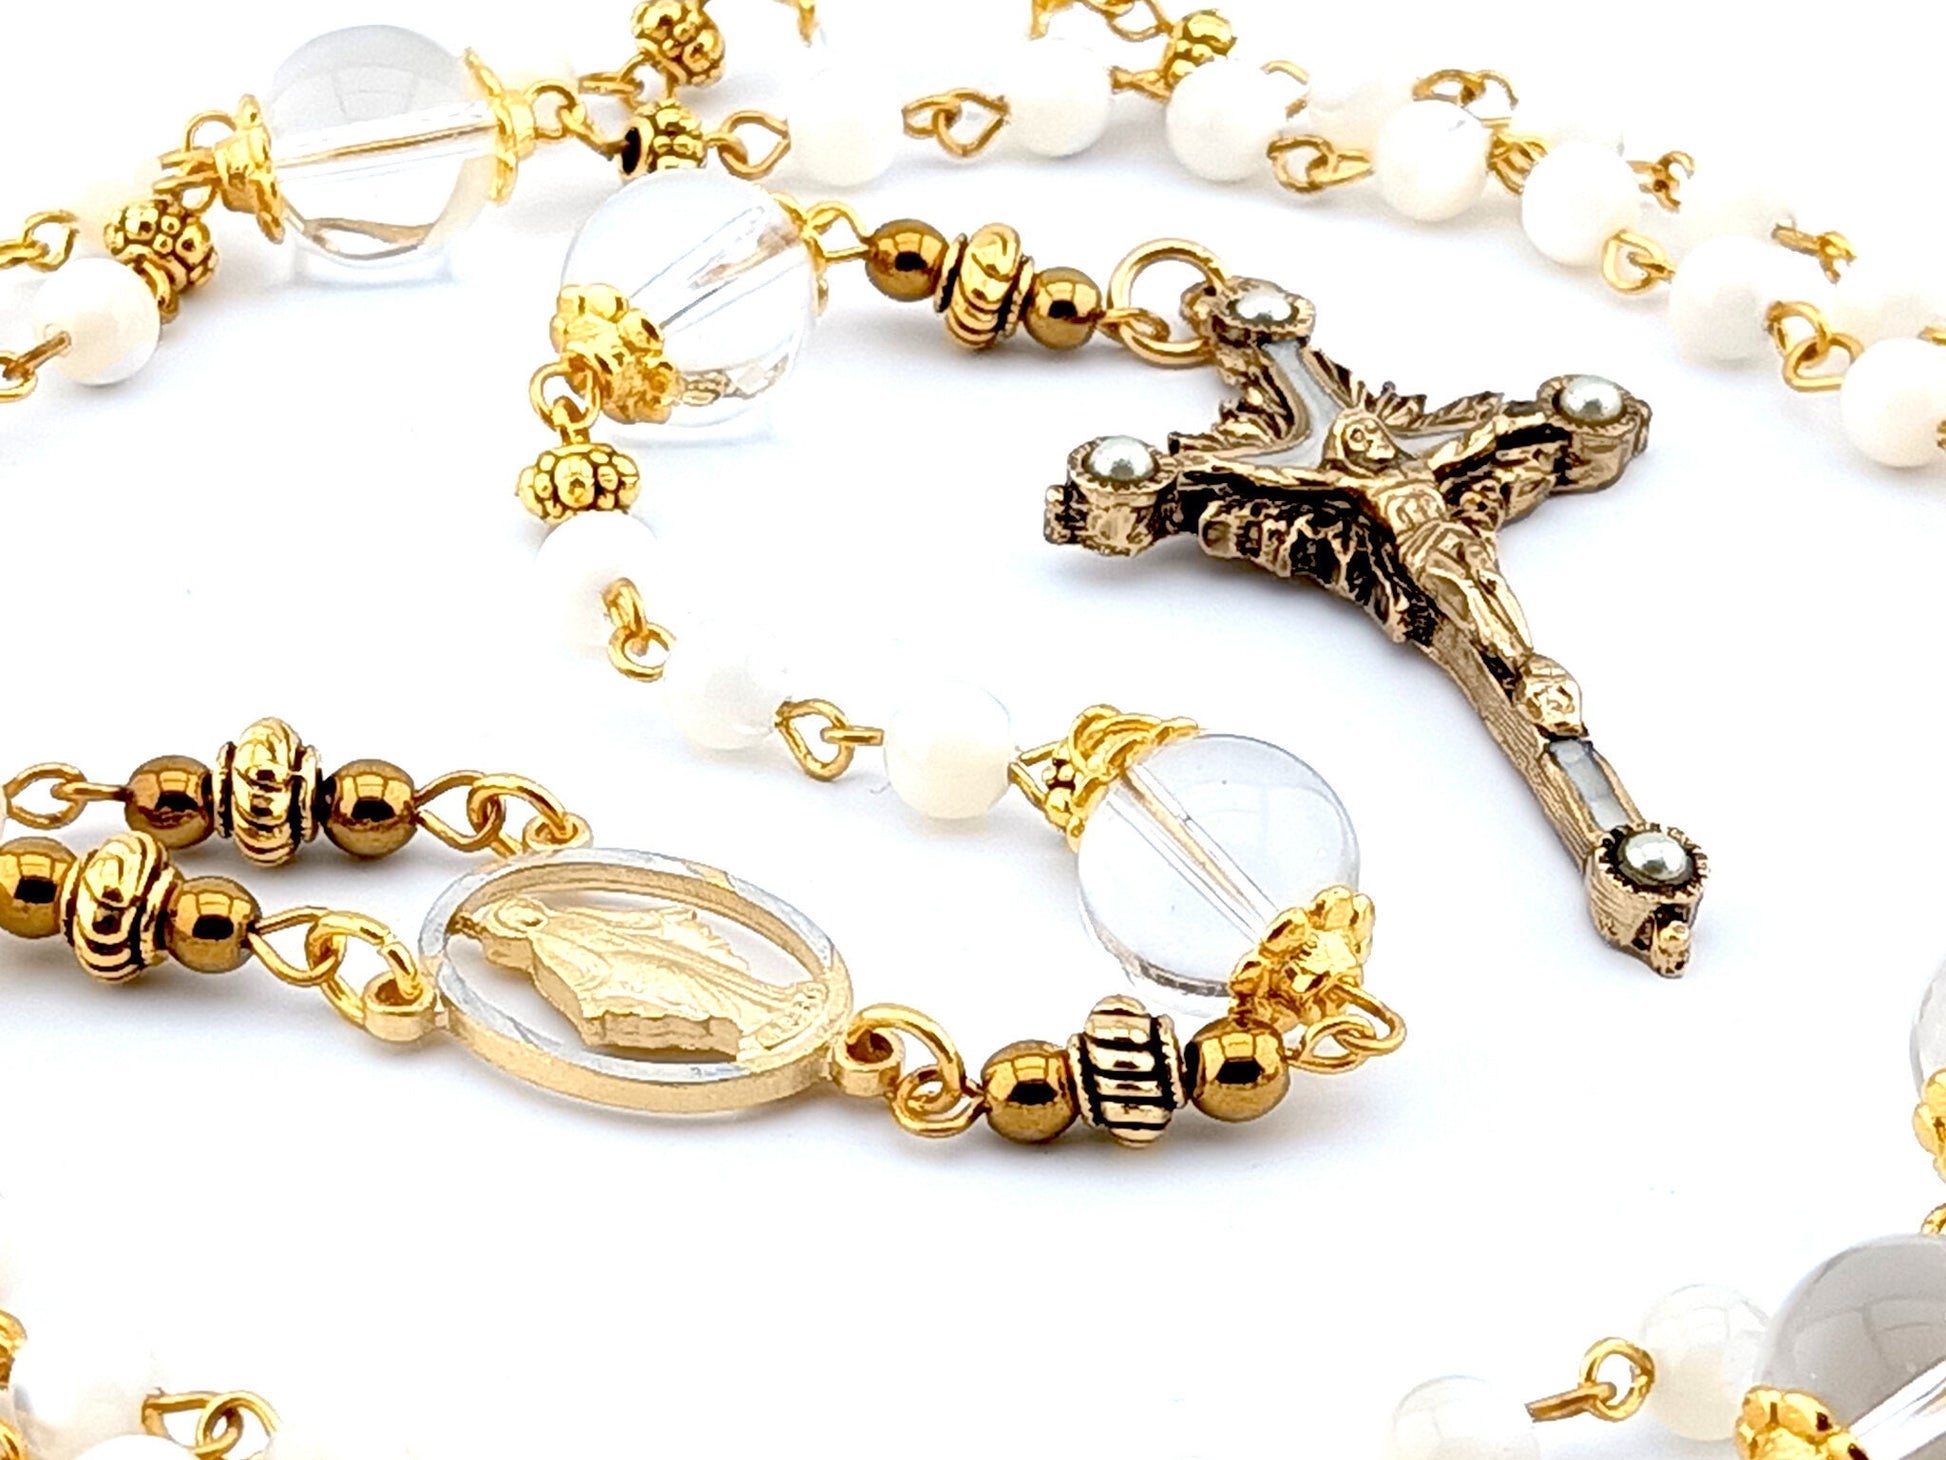 Miraculous Medal unique rosary beads with mother of pearl and glass beads, pewter crucifix and golden linking beads.